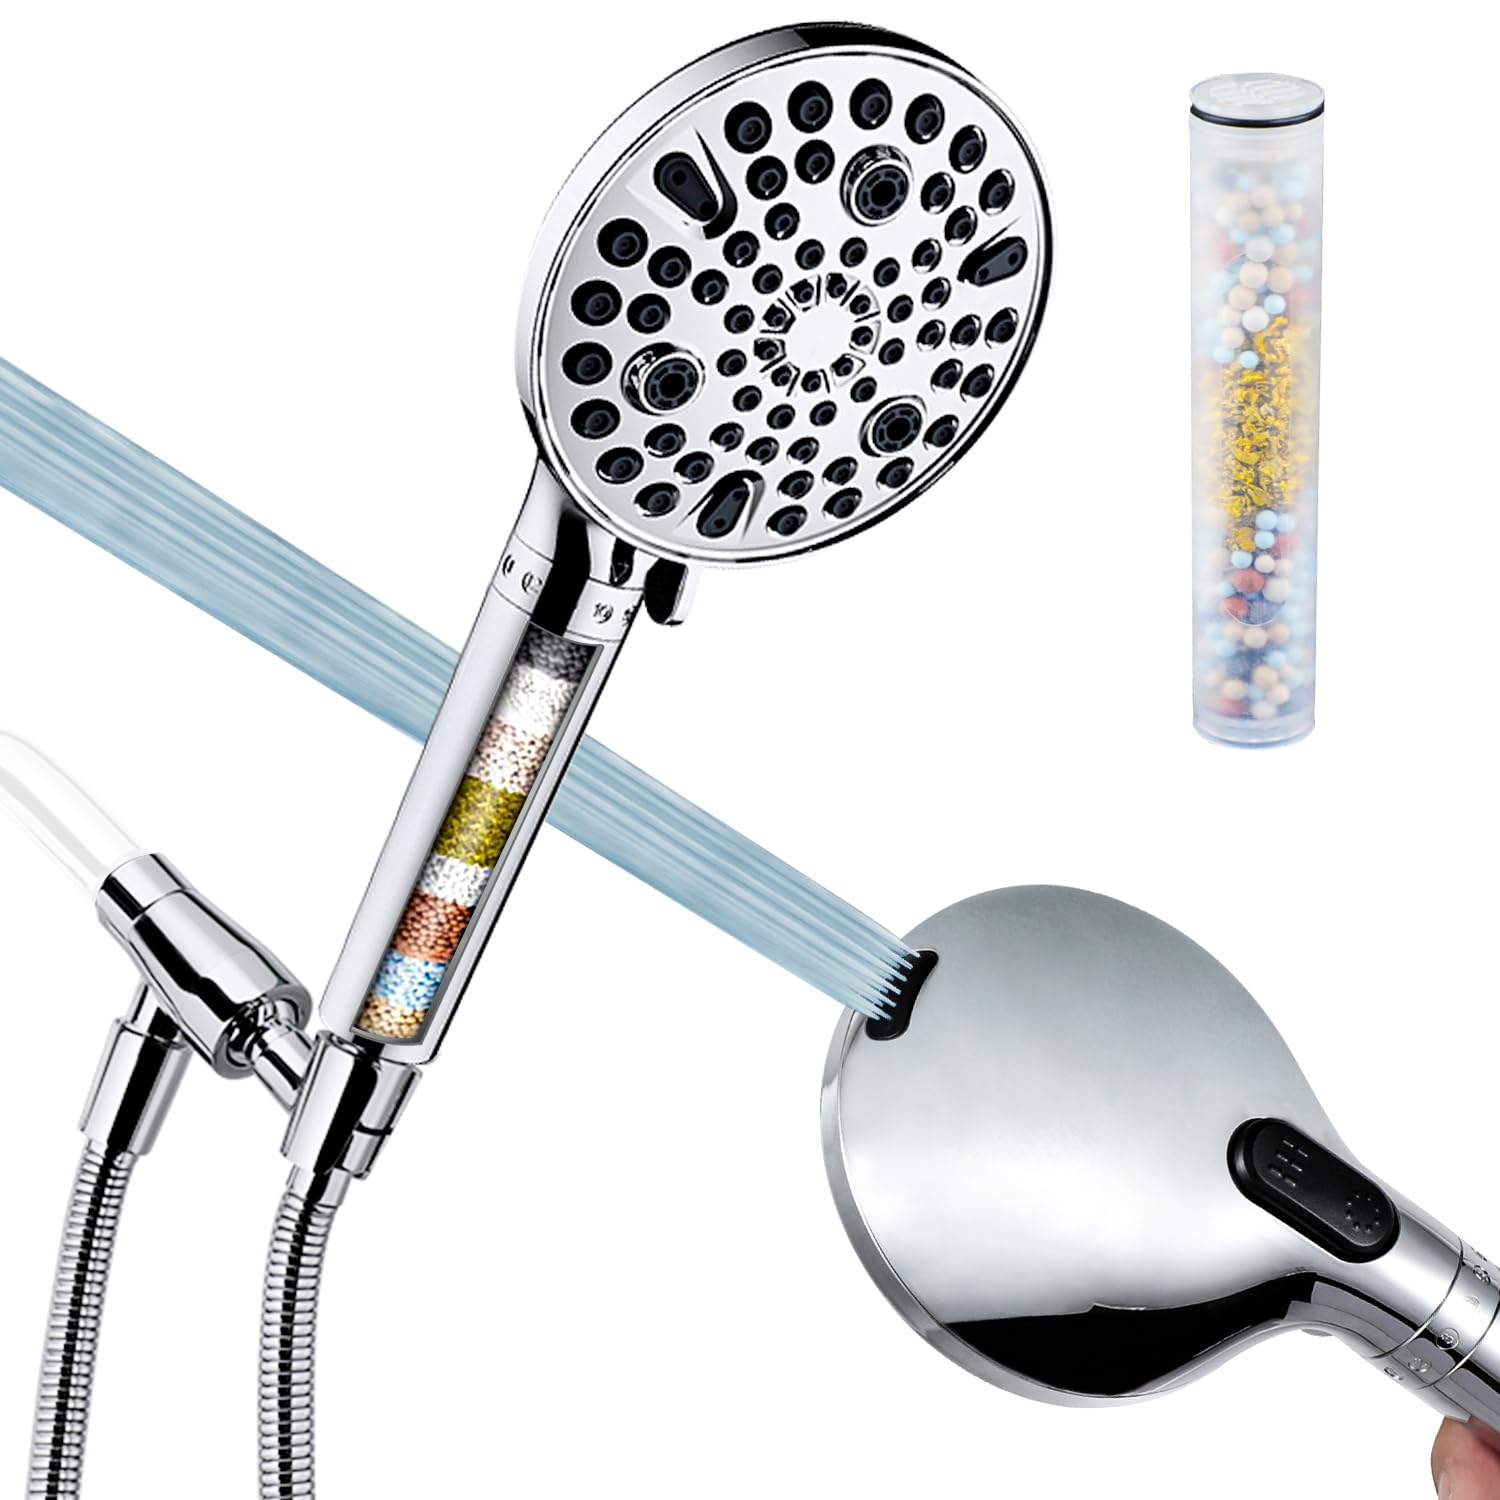 V-Frankness 10-Mode Filtered Shower Head| High Pressure Handheld ShowerHead with 70" Hose and Metal Adjustable Holder Combo| Hard Water Softener to Remove Chlorine and Heavy Metals (Chrome)